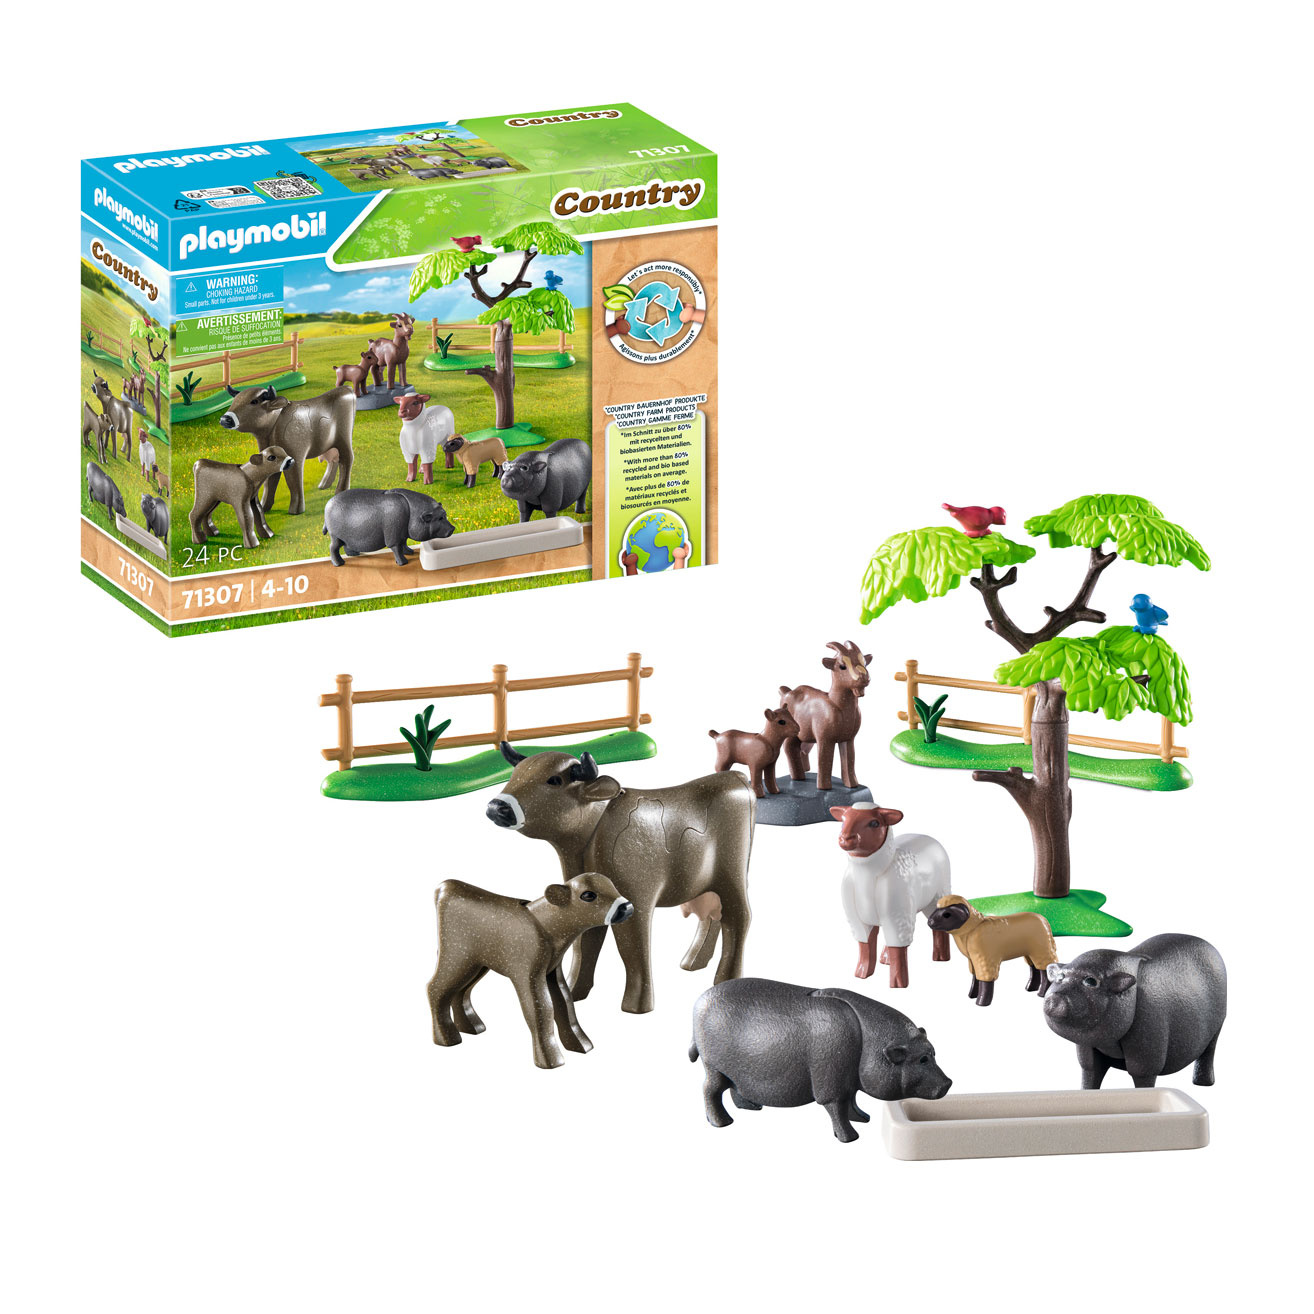 Playmobil Country Supplément animaux - 71307